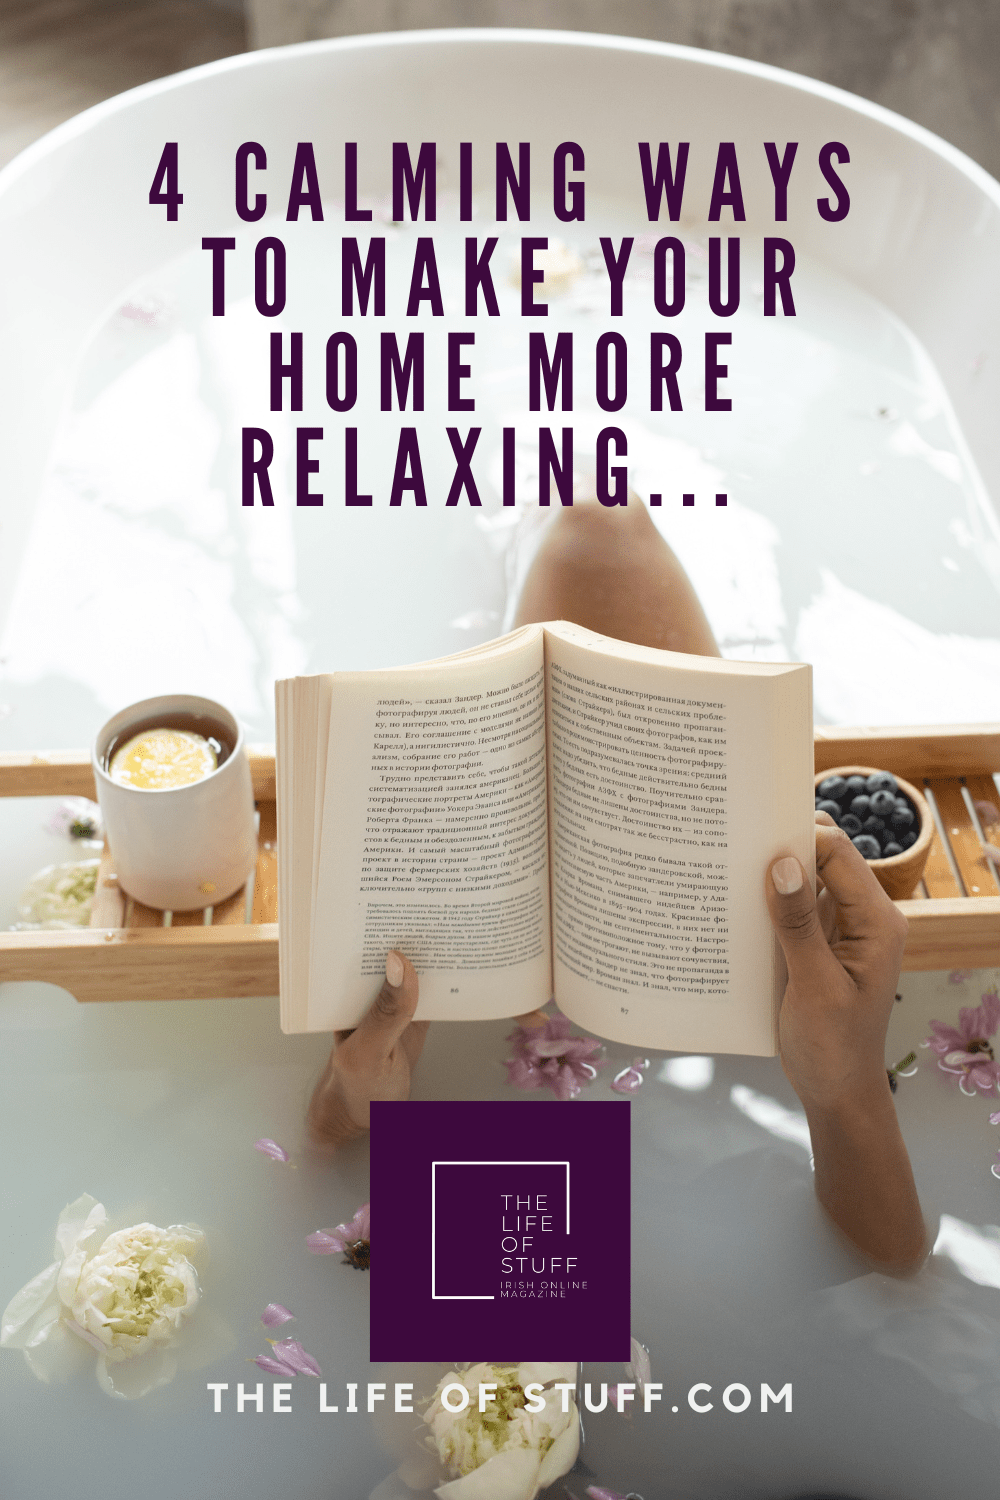 4 Calming Ways to Make Your Home More Relaxing - The Life of Stuff - Irish Online Magazine